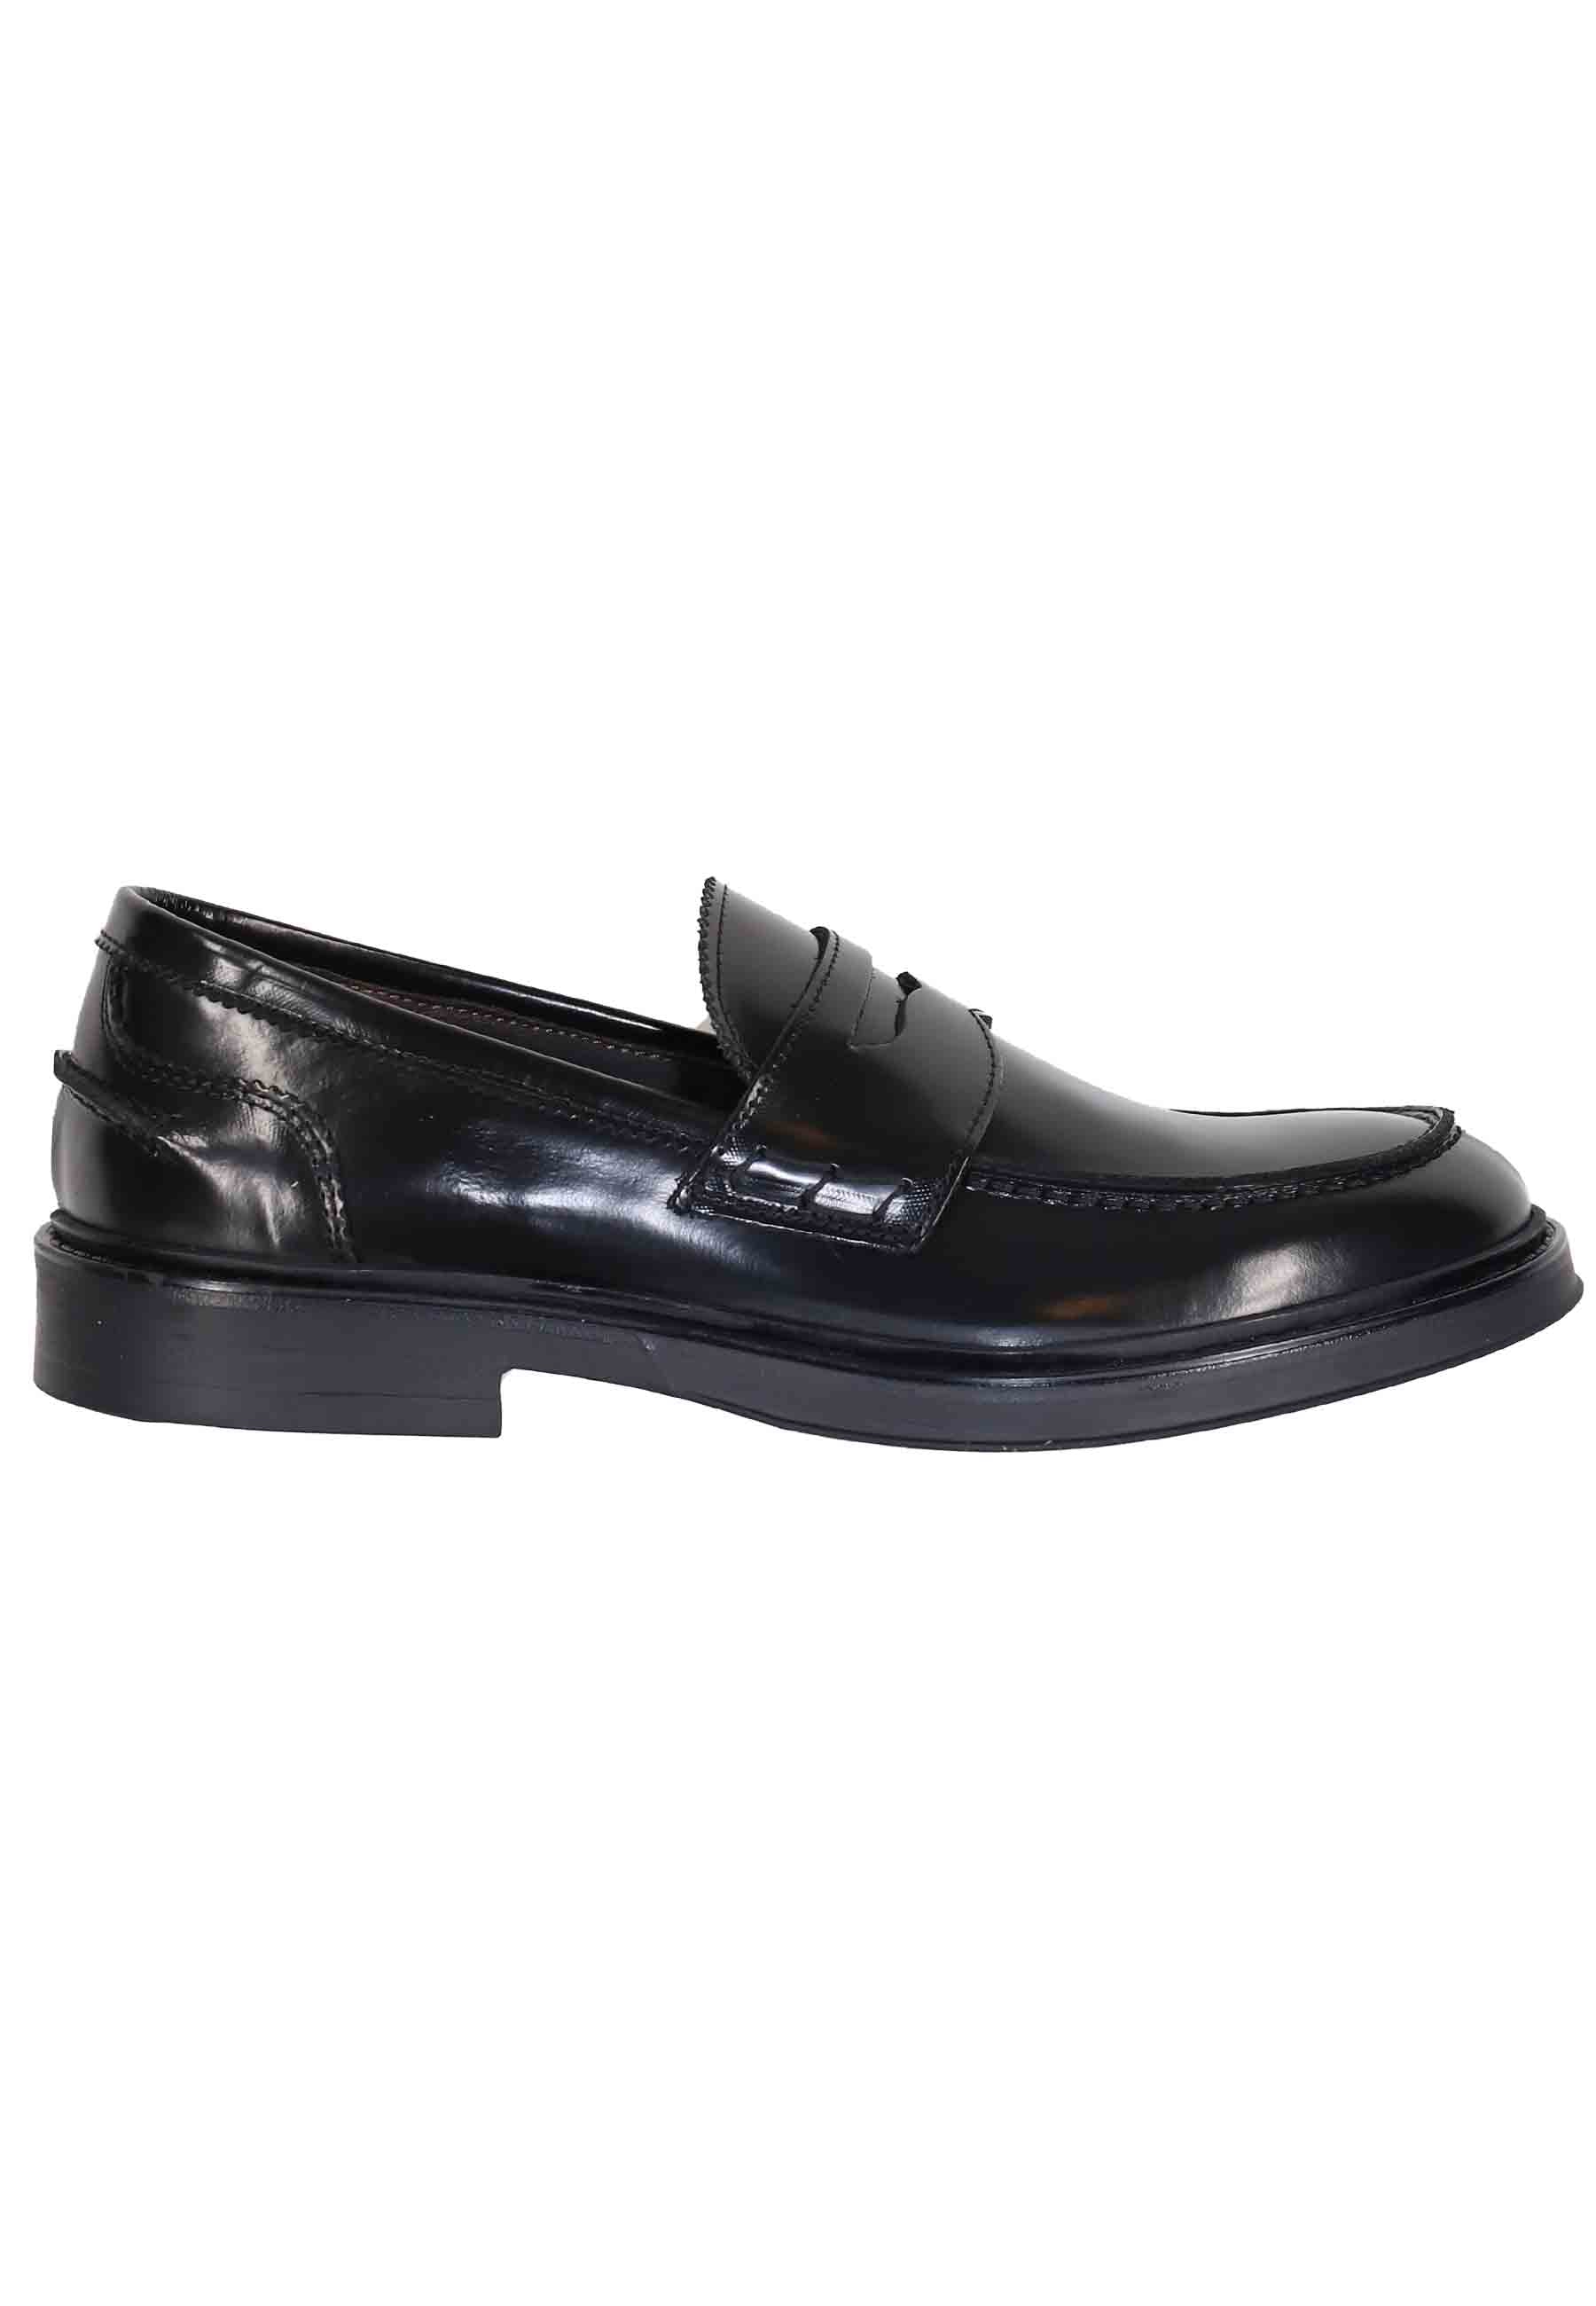 Men's moccasins in shiny black leather with rubber sole